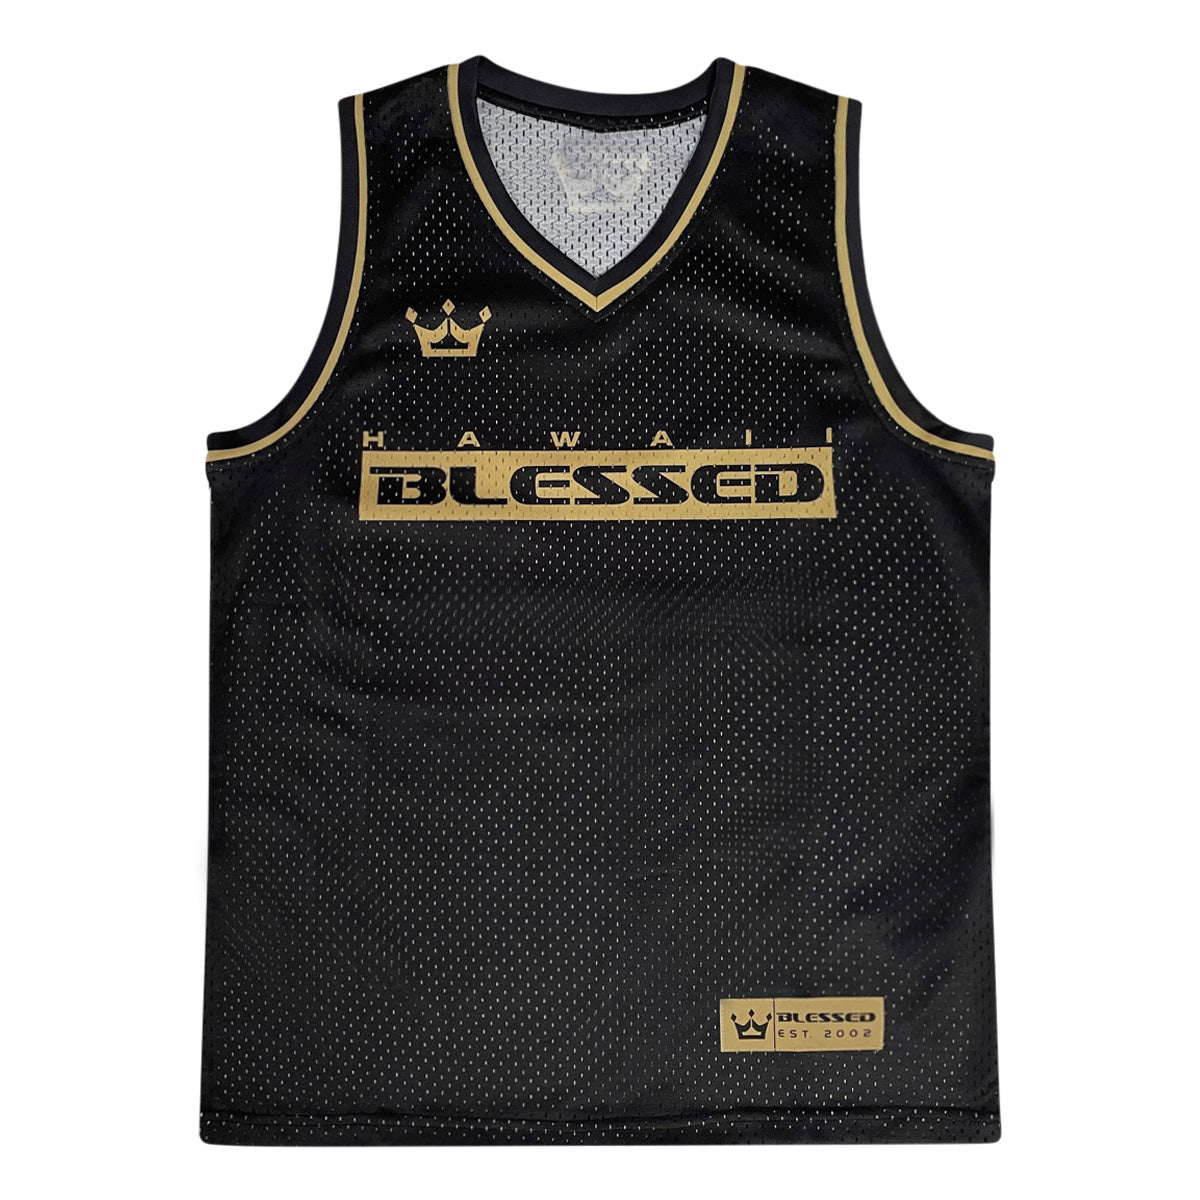 Black & Gold Jersey Adult and Kids